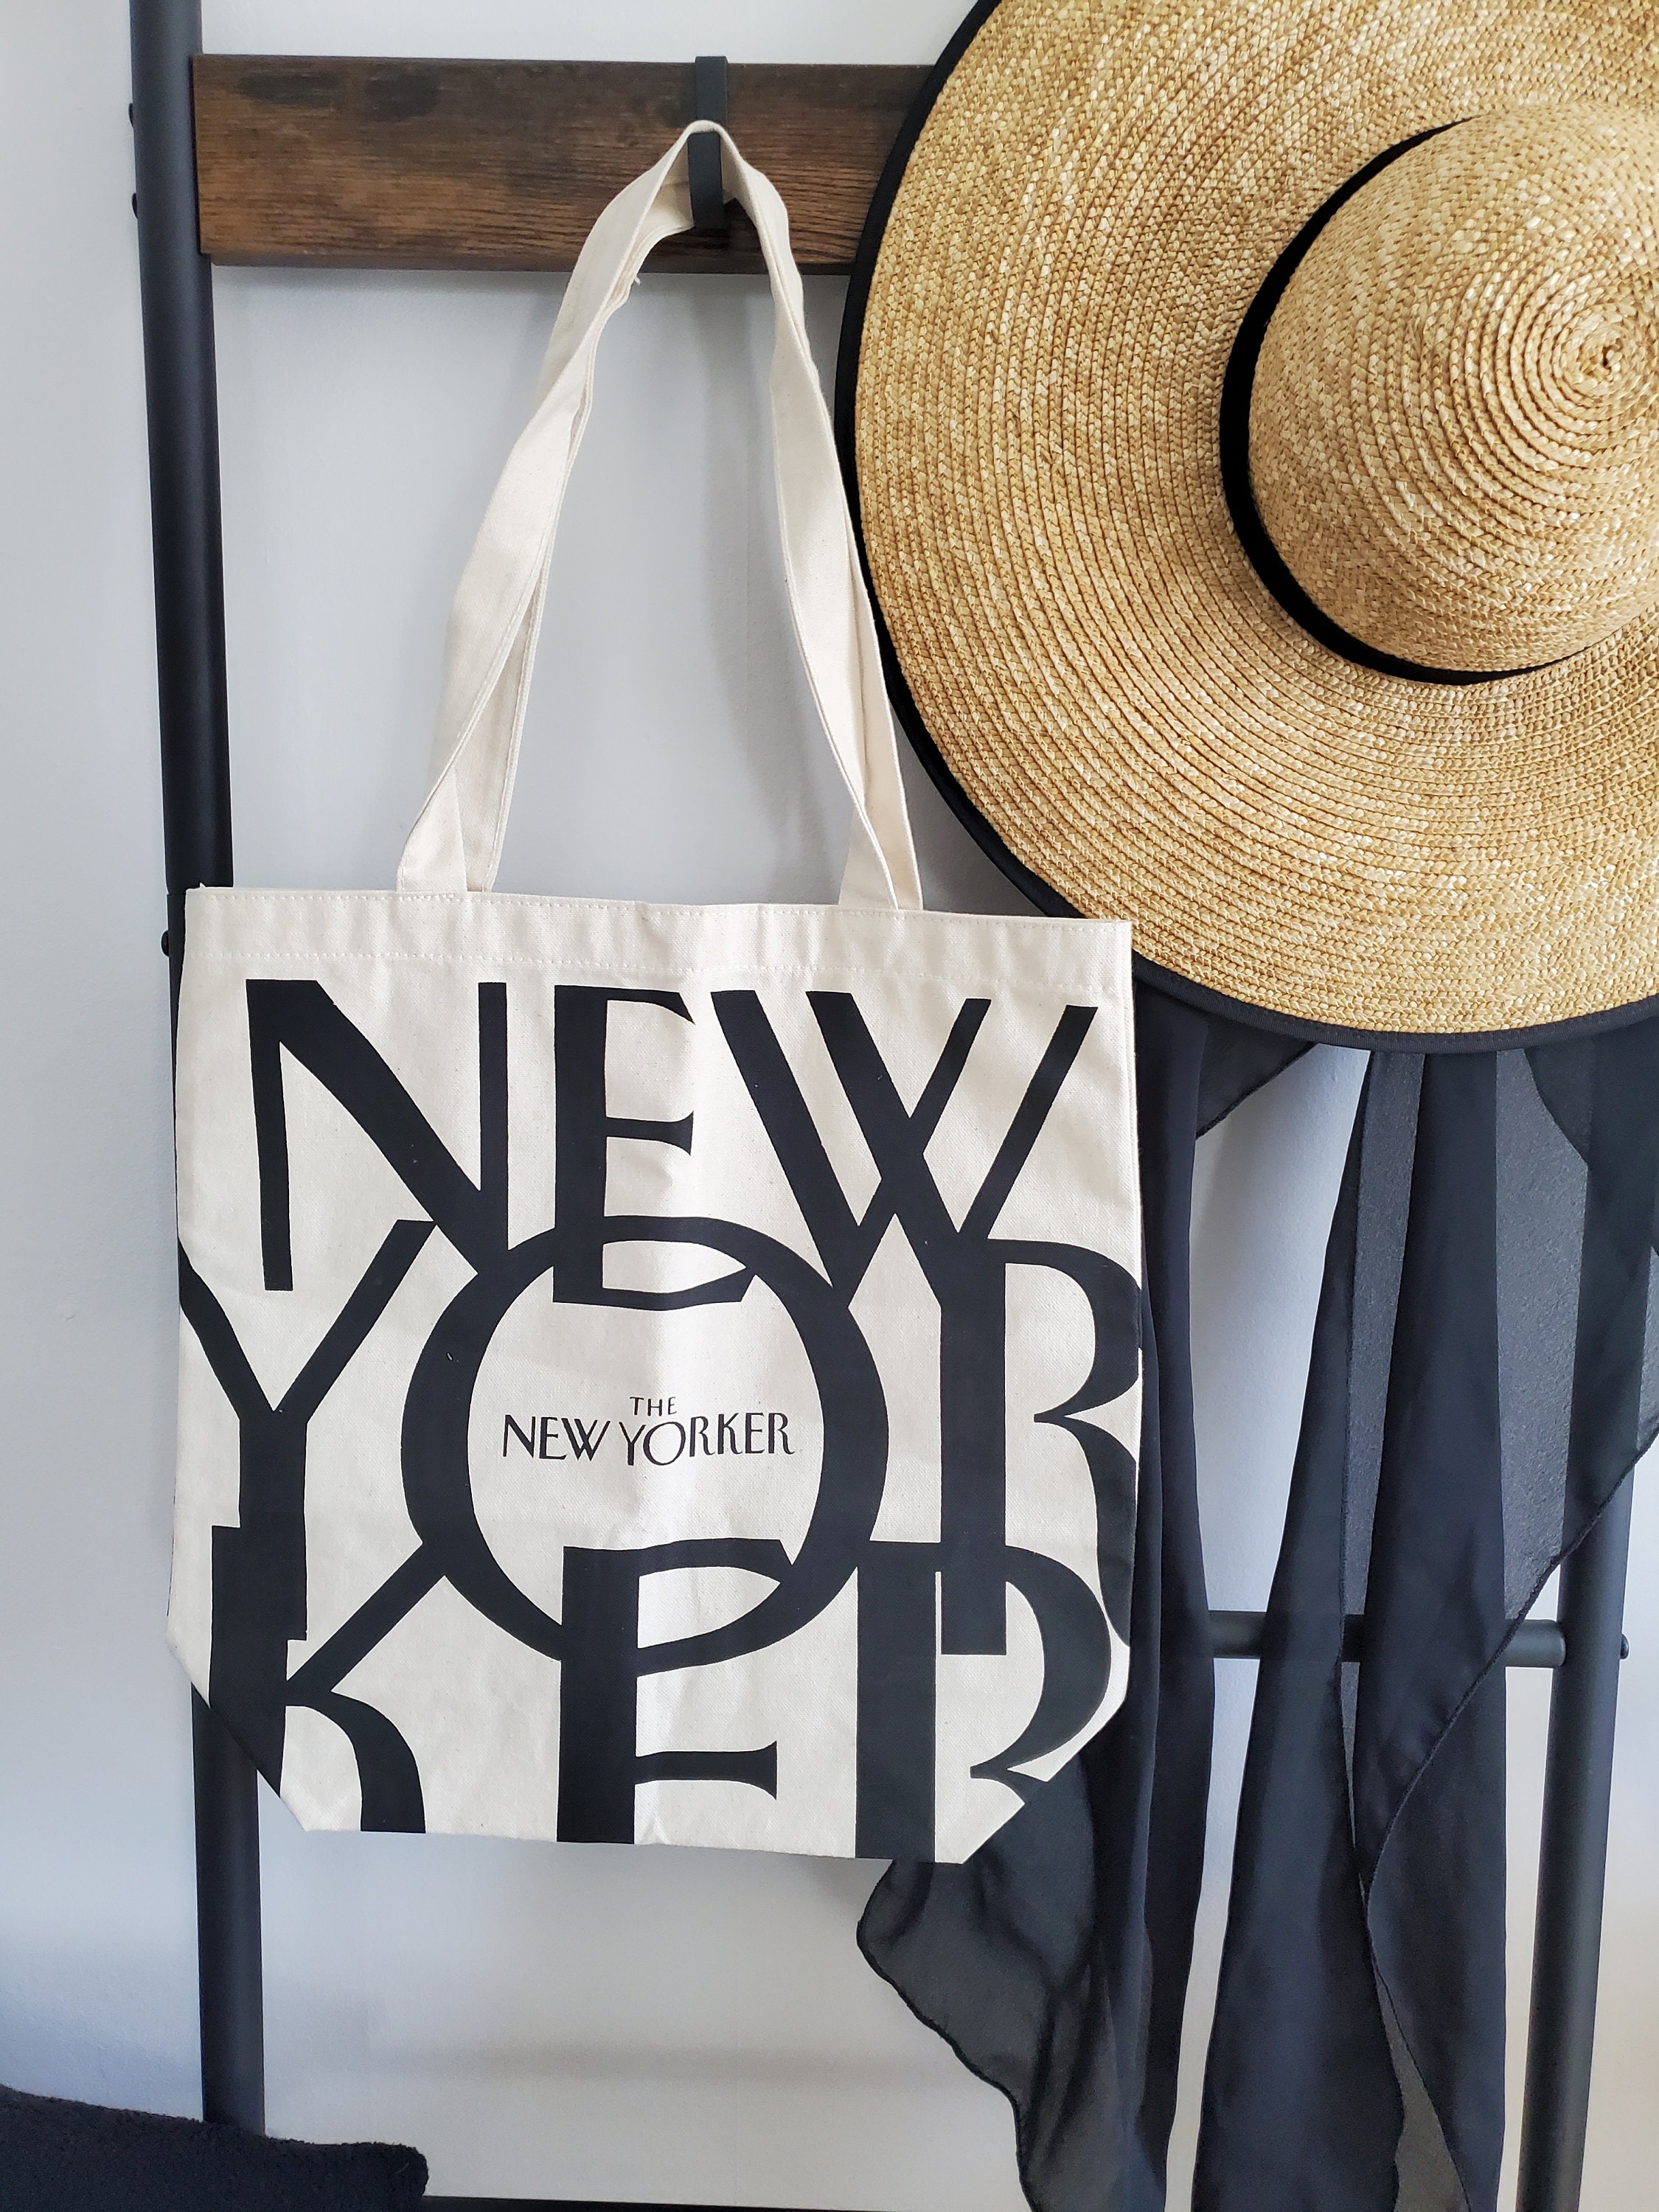  New Yorker tote bag, New Yorker magazine bag, New